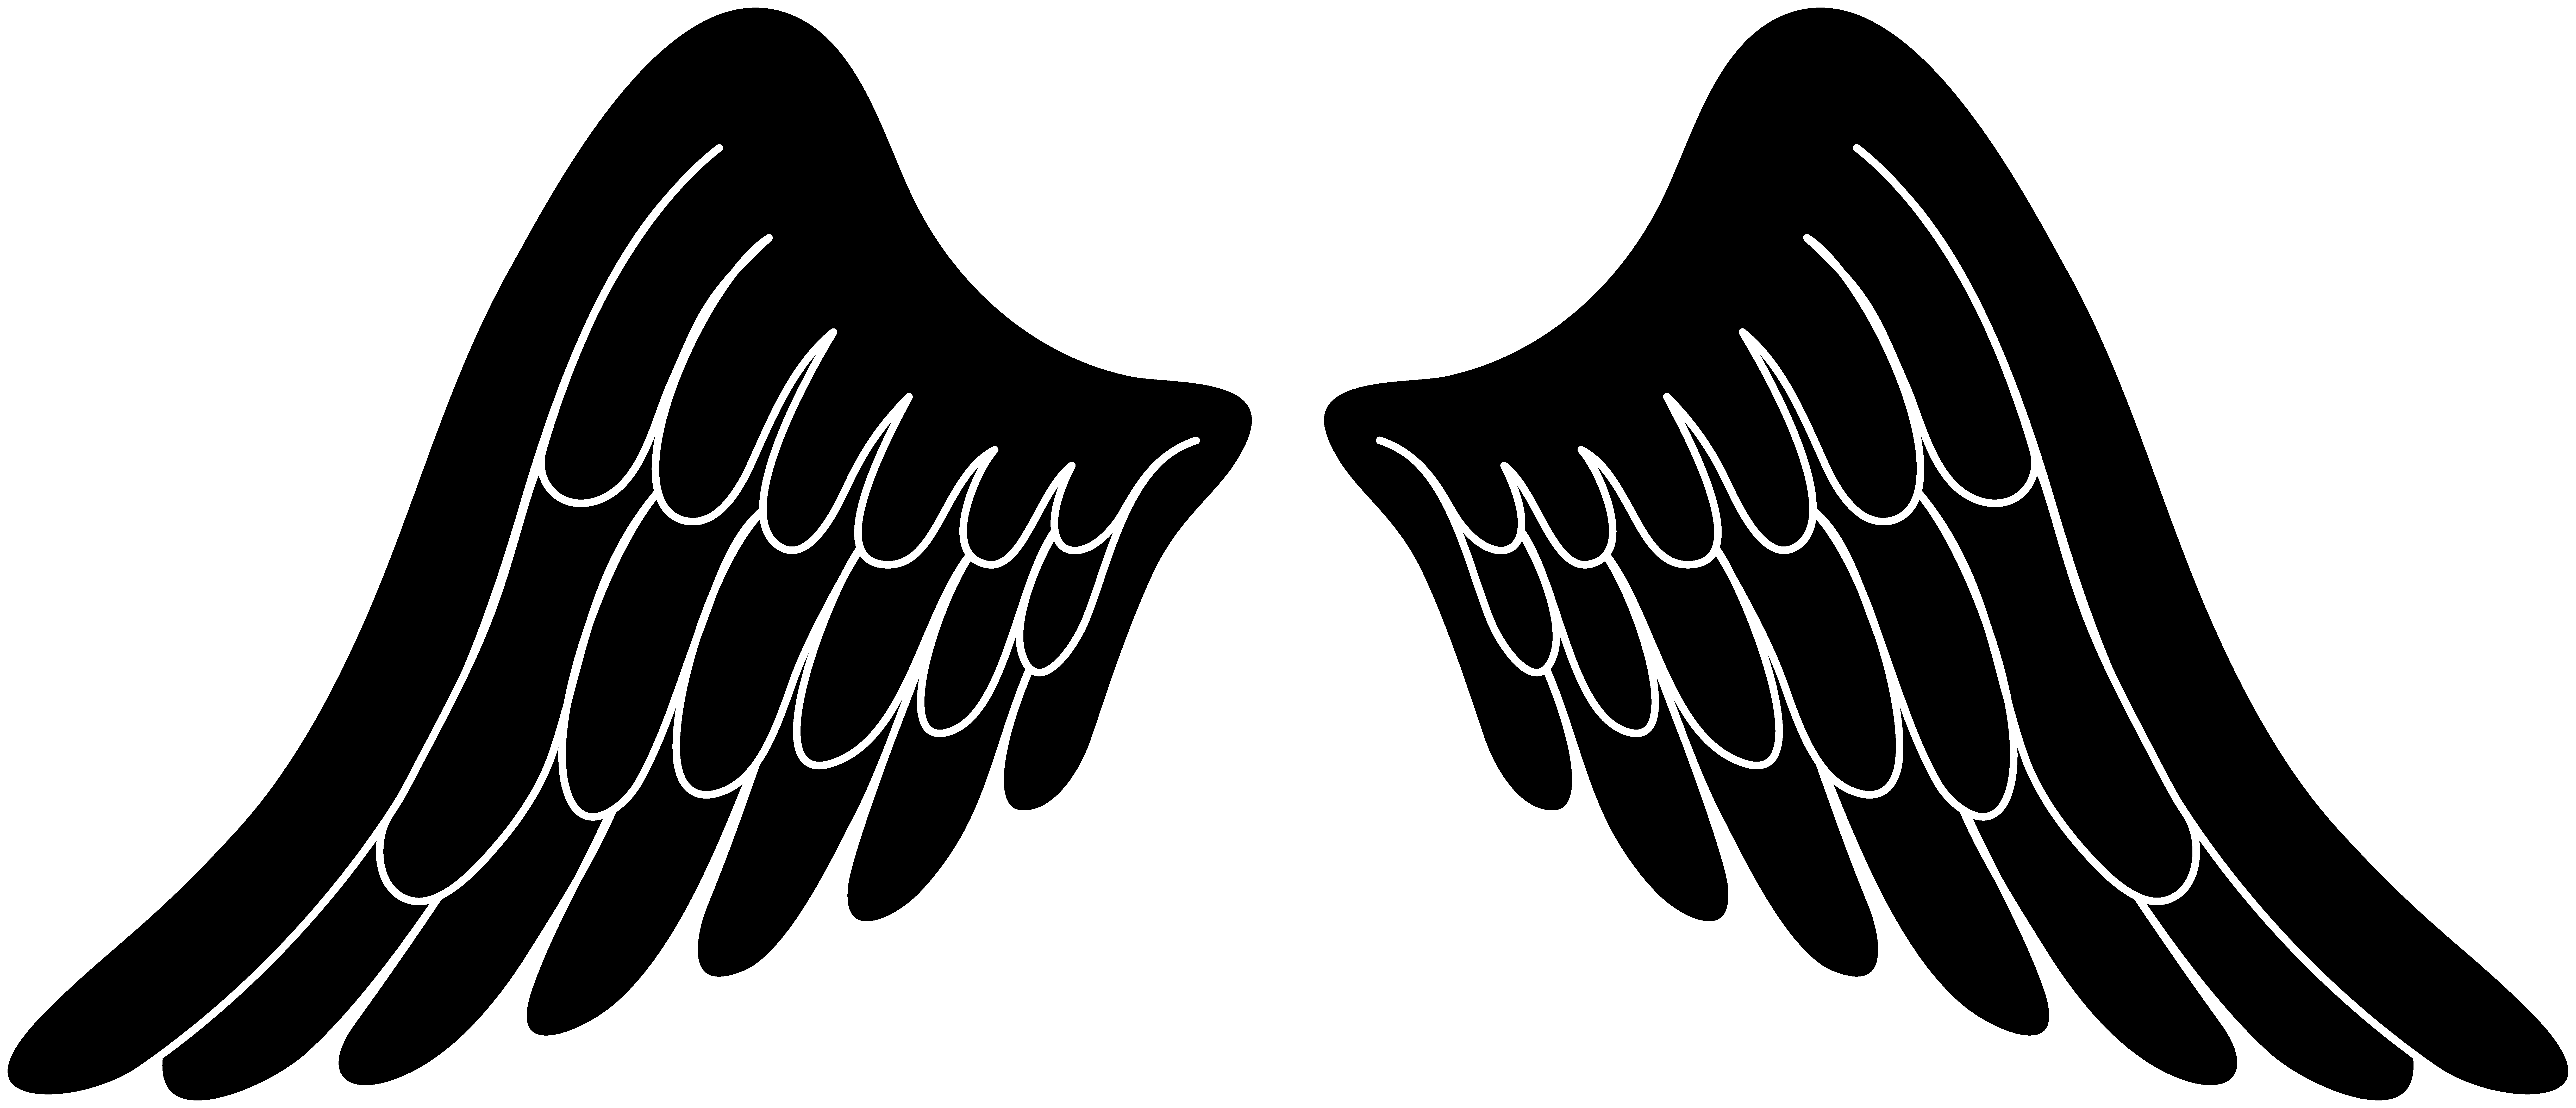 Angel wings clipart - Clipground